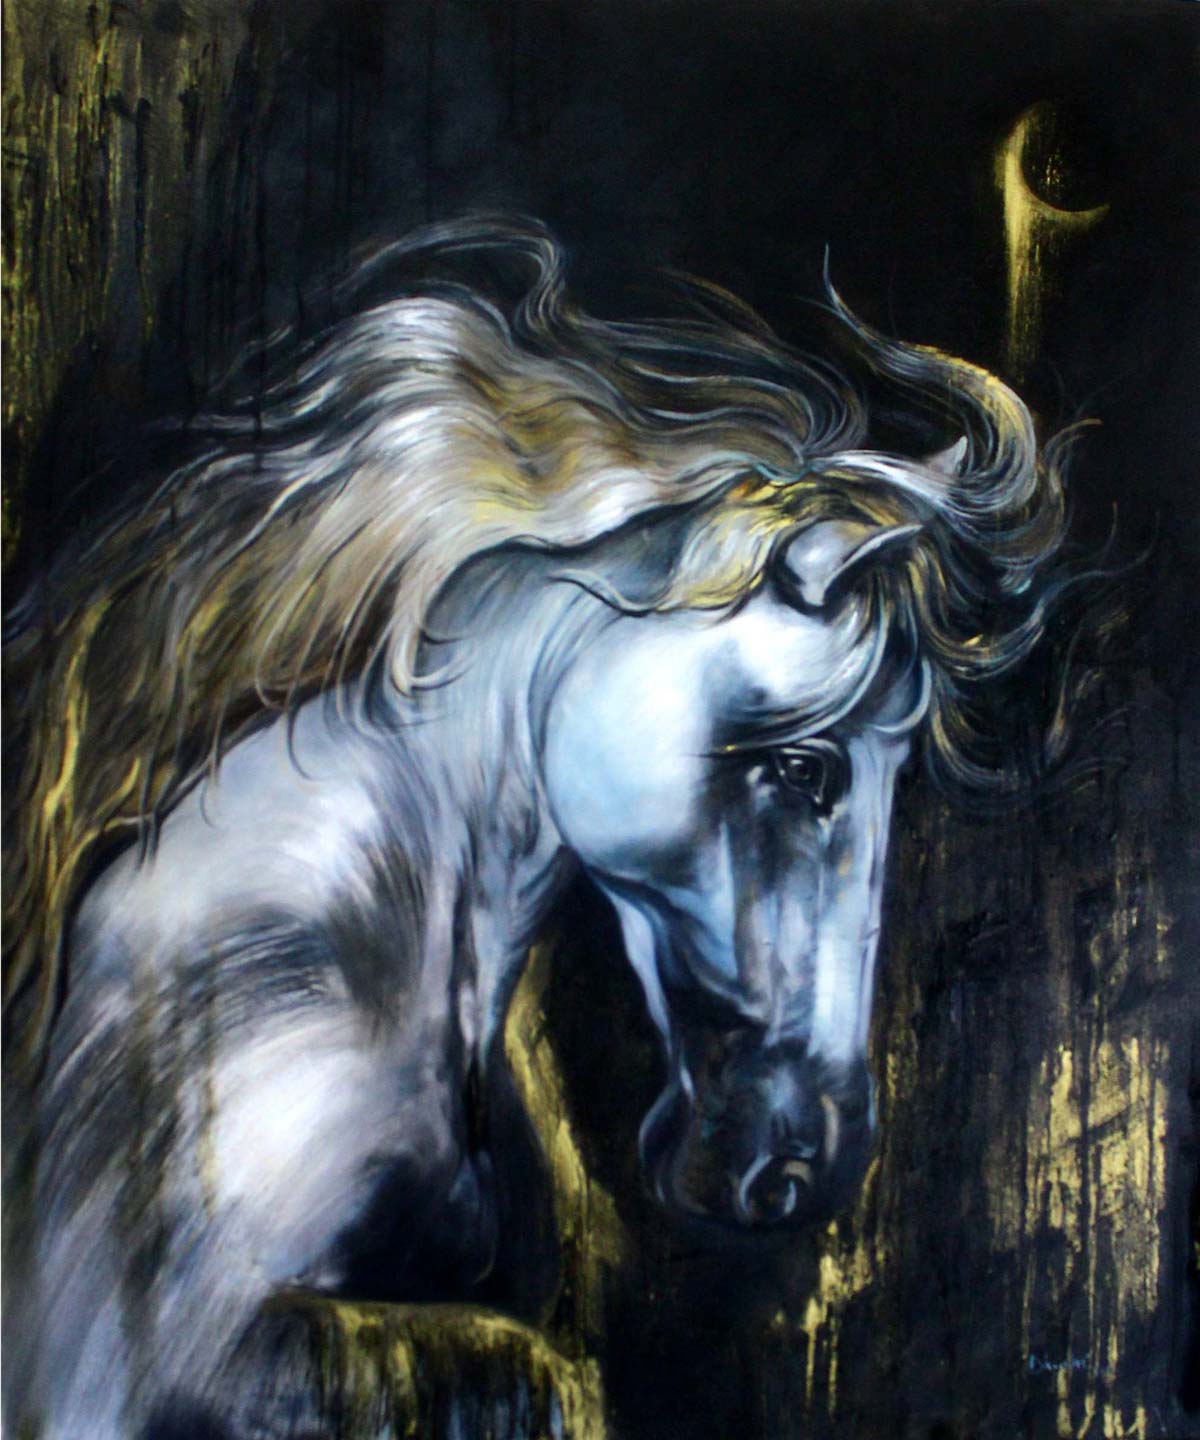 Figurative Painting with Oil on Canvas "The Dreaming Horse" art by Dhanashri Kale